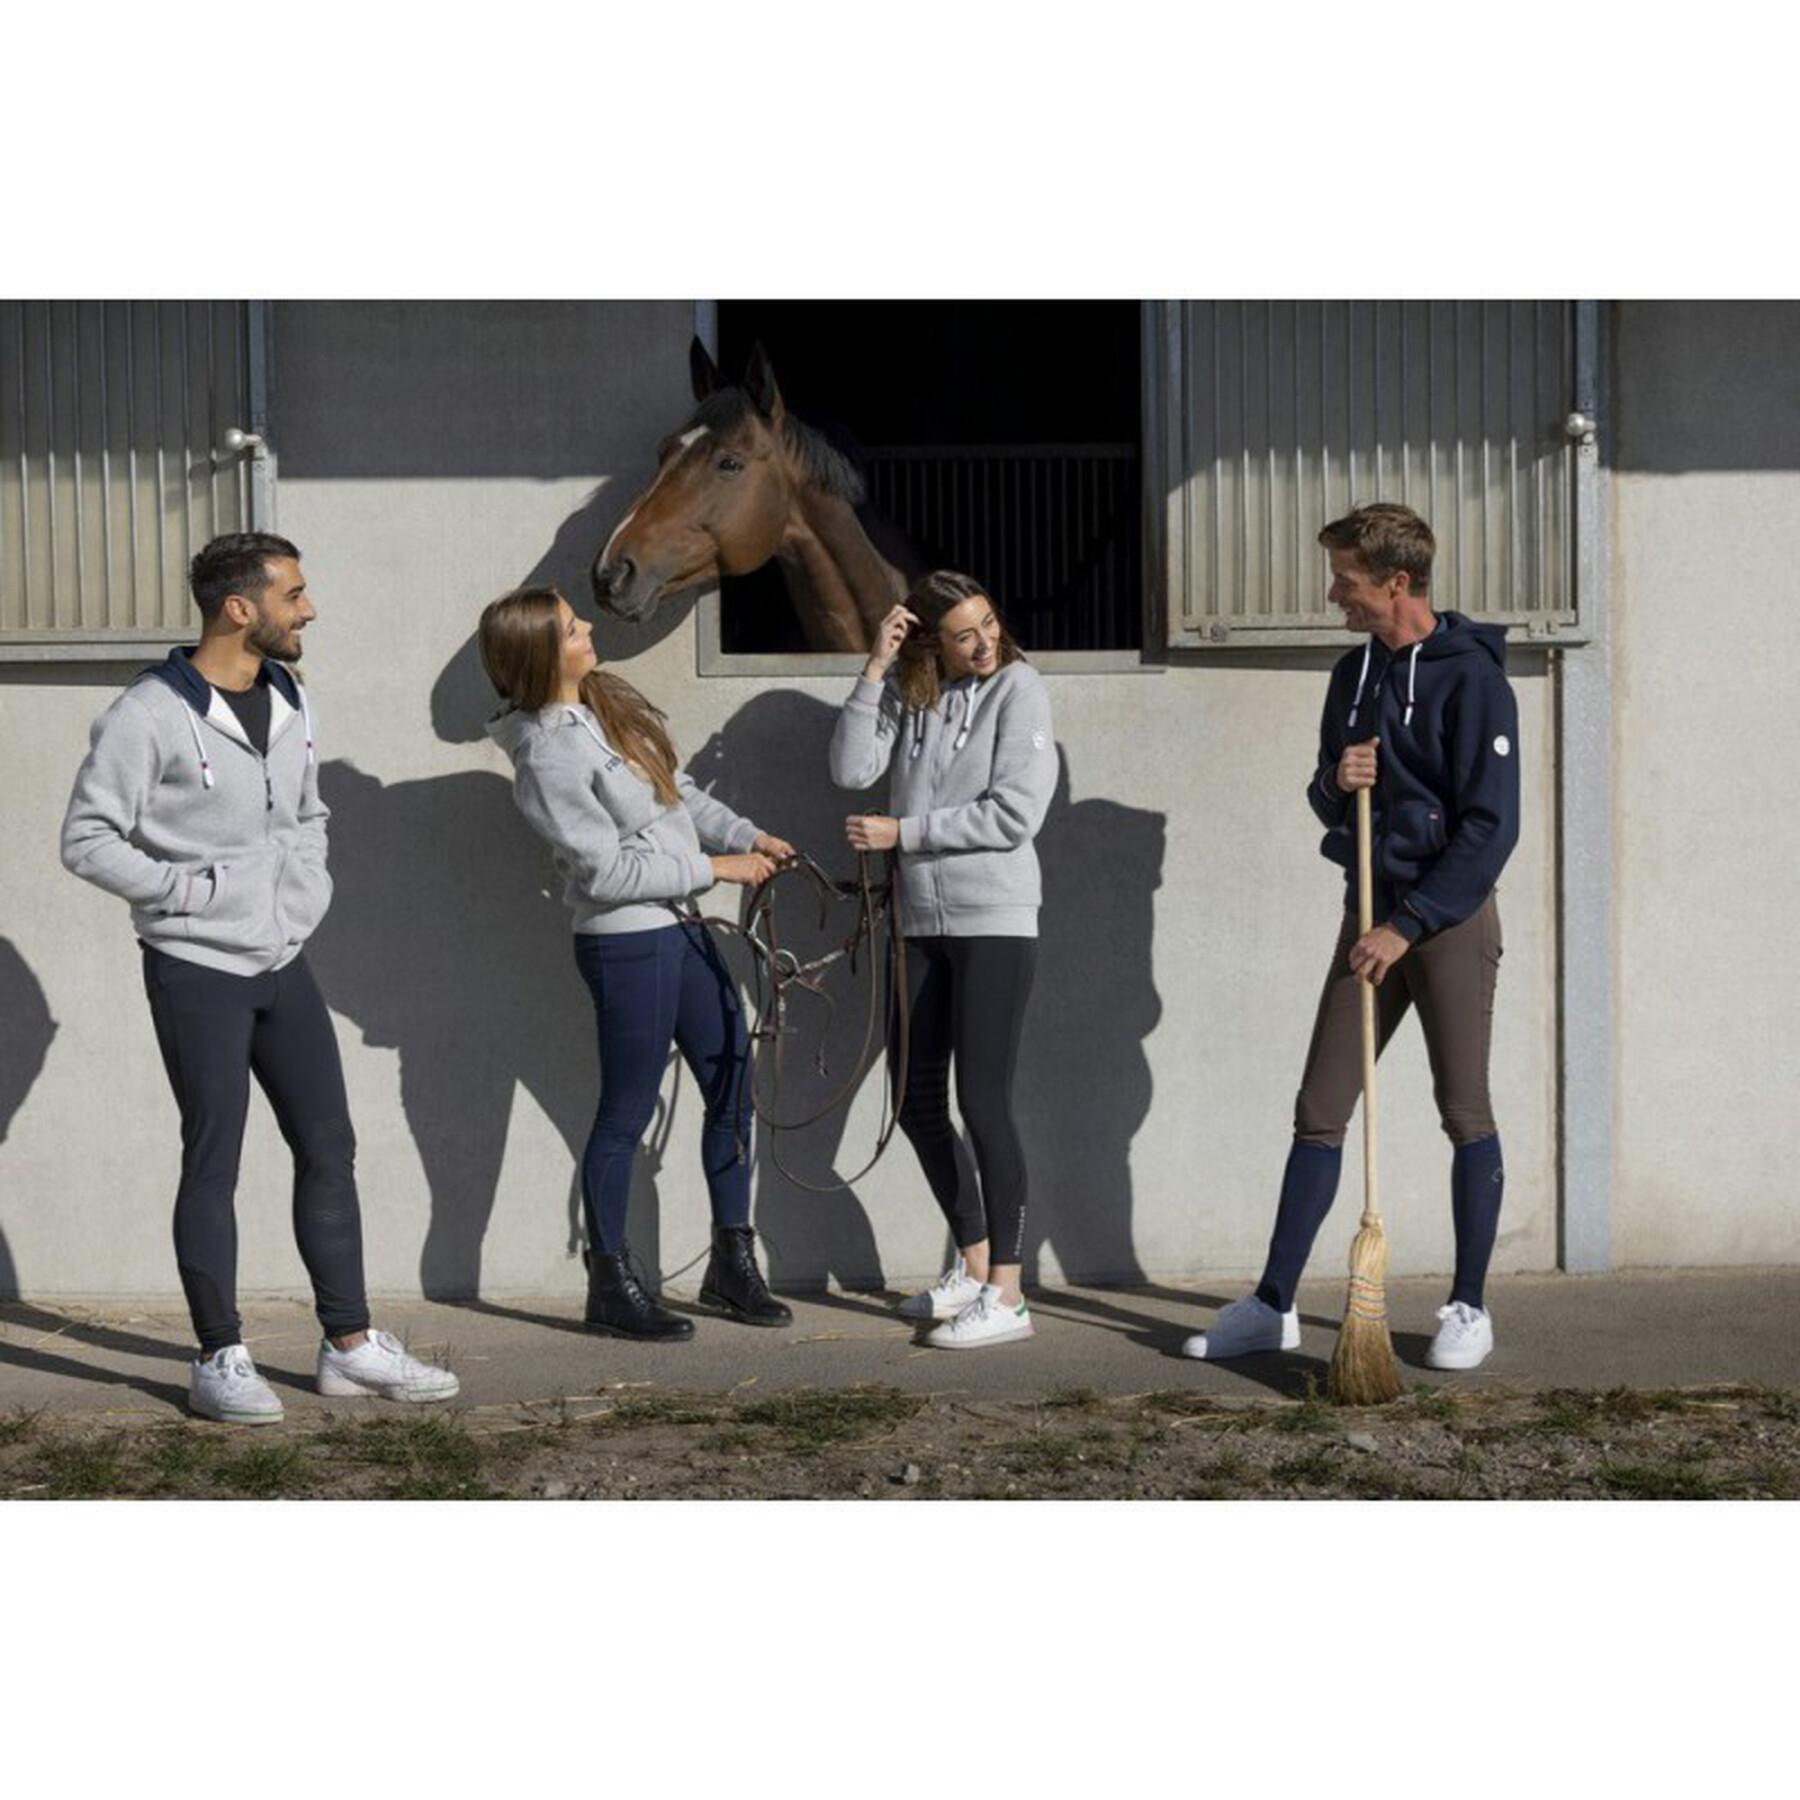 Hoodie riding woman Equithème Britney